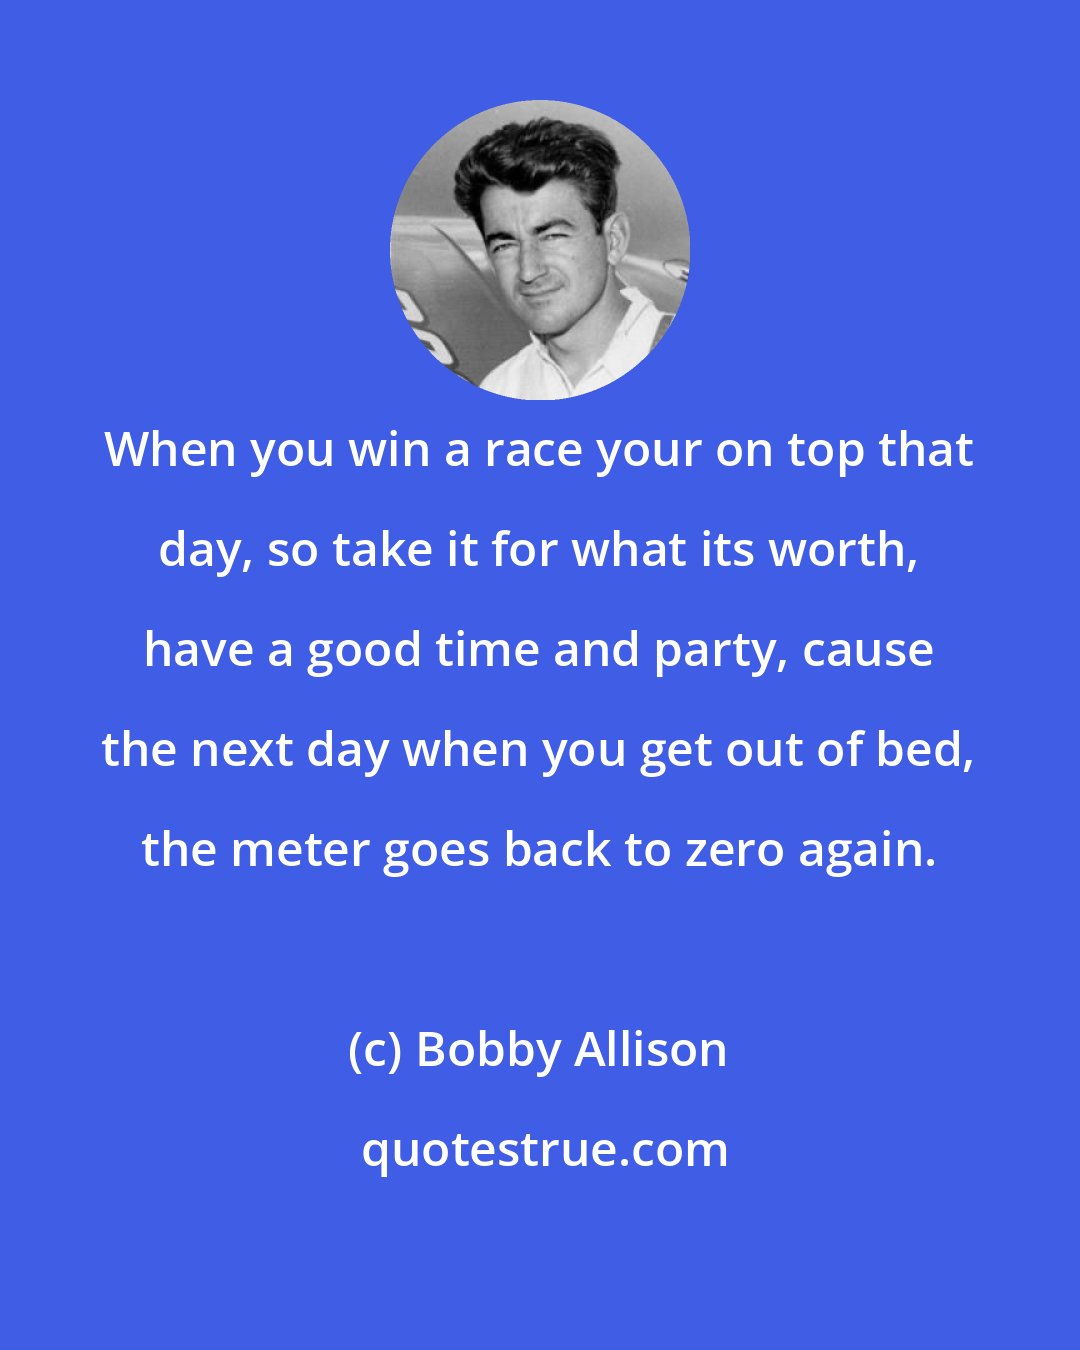 Bobby Allison: When you win a race your on top that day, so take it for what its worth, have a good time and party, cause the next day when you get out of bed, the meter goes back to zero again.